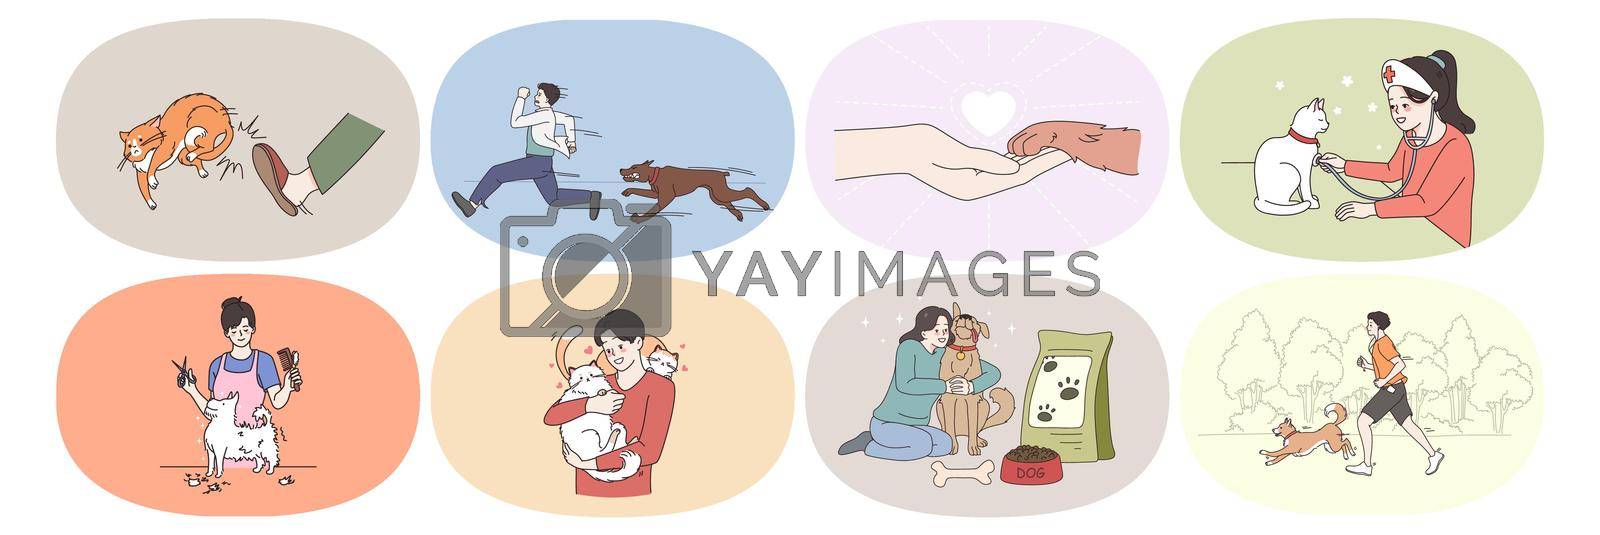 Set of diverse people with cats and dogs enjoy life with domestic animals. Collection of men and women take care of pets. Grooming and vet service concept. Flat vector illustration.